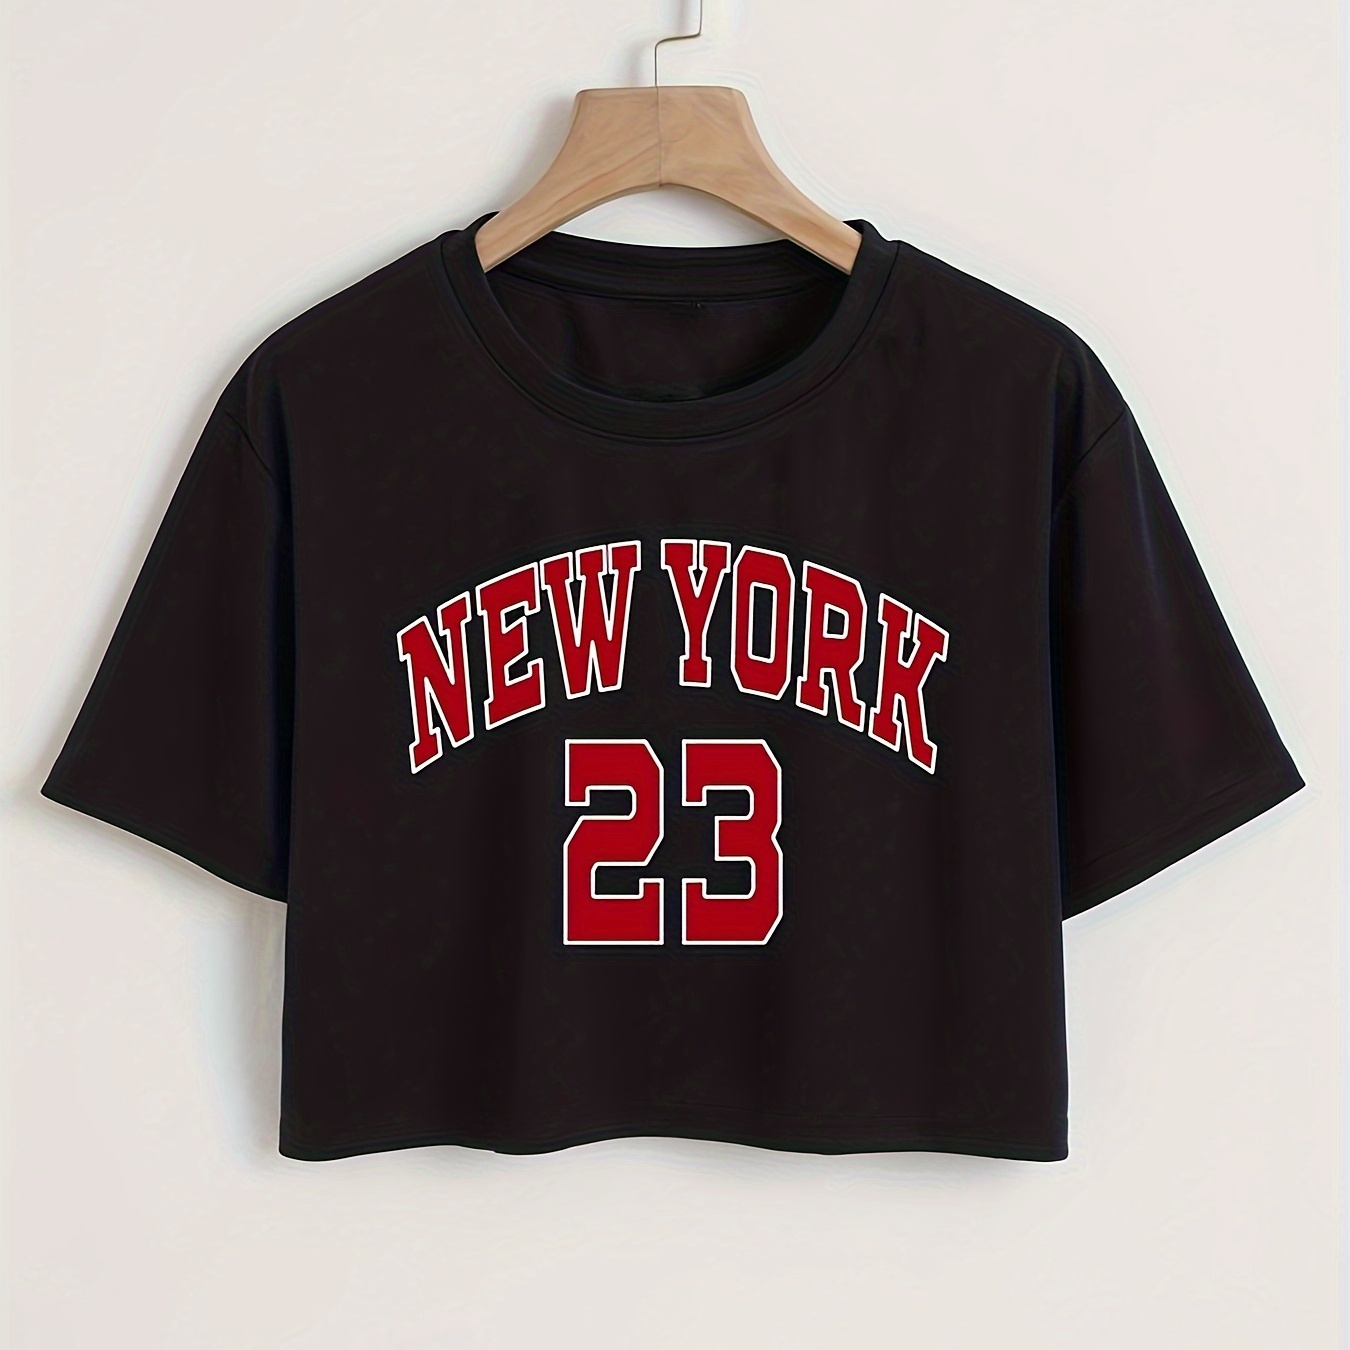 

New York Print T-shirt, Casual Short Sleeve Crew Neck Crop Top For Spring & Summer, Women's Clothing